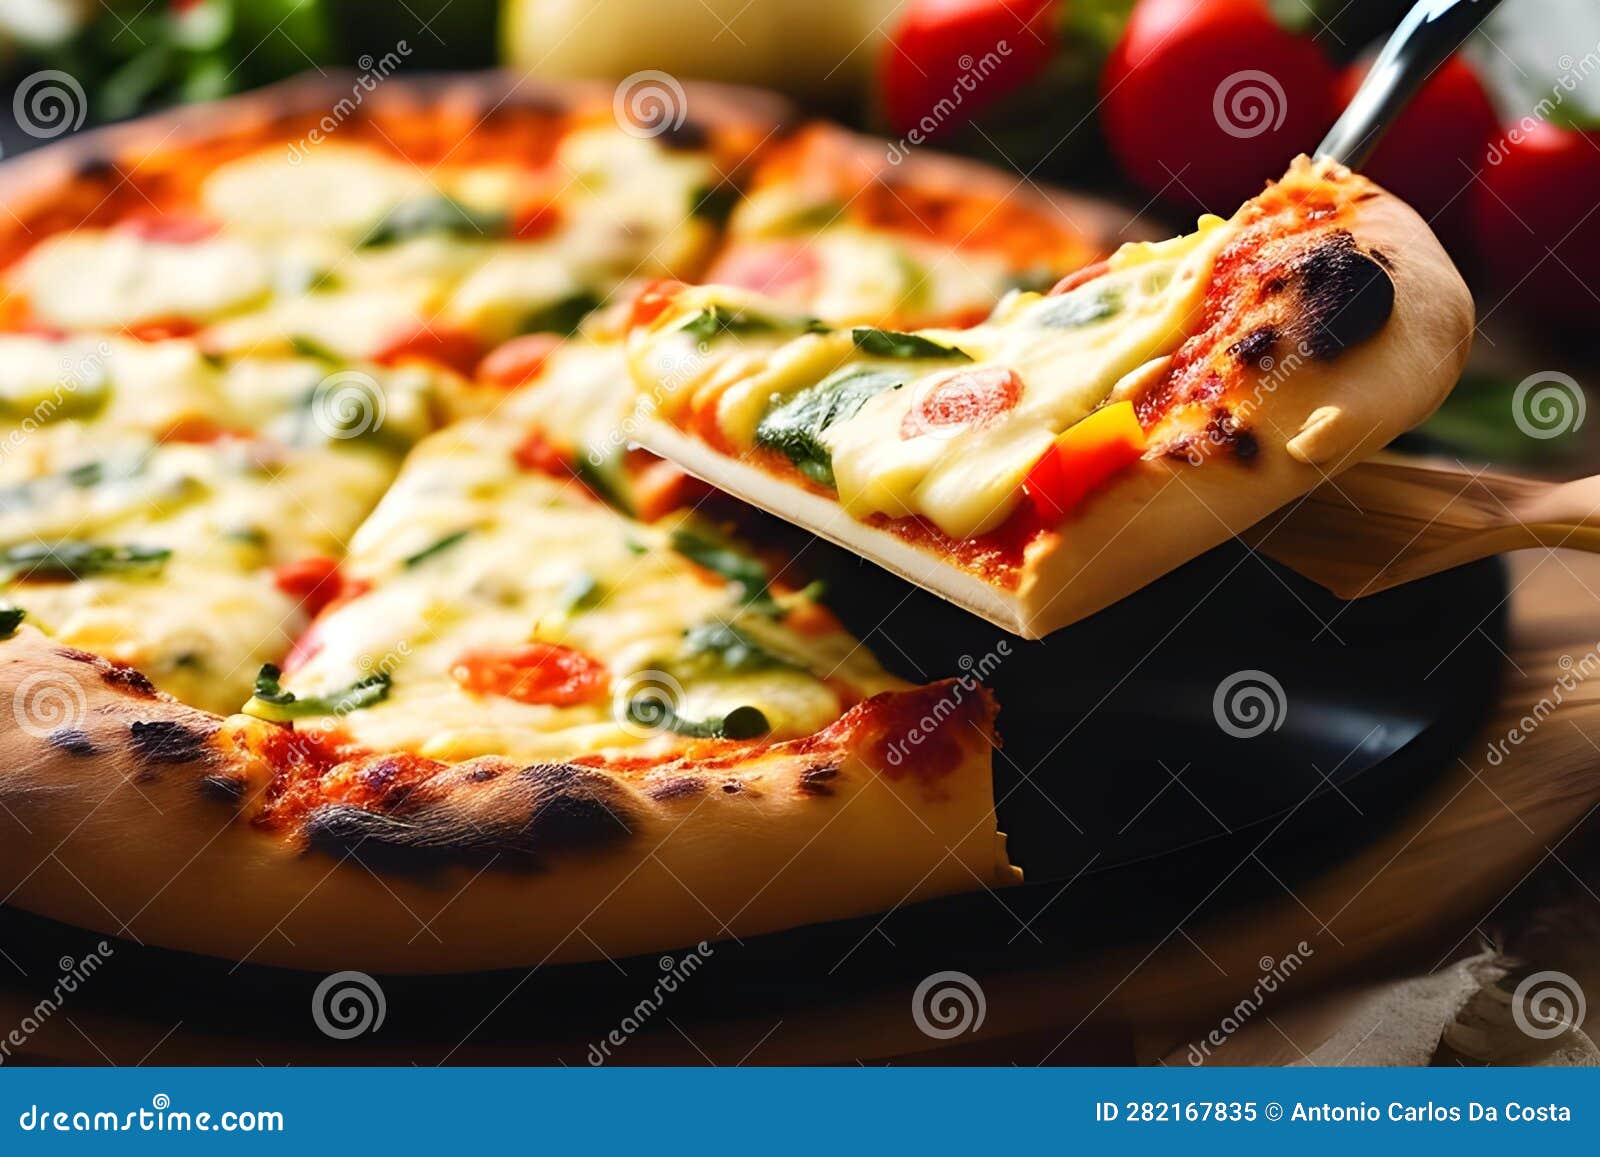 pizza, with its triangular slices and varied toppings, is a culinary masterpiece that brings people together around the table